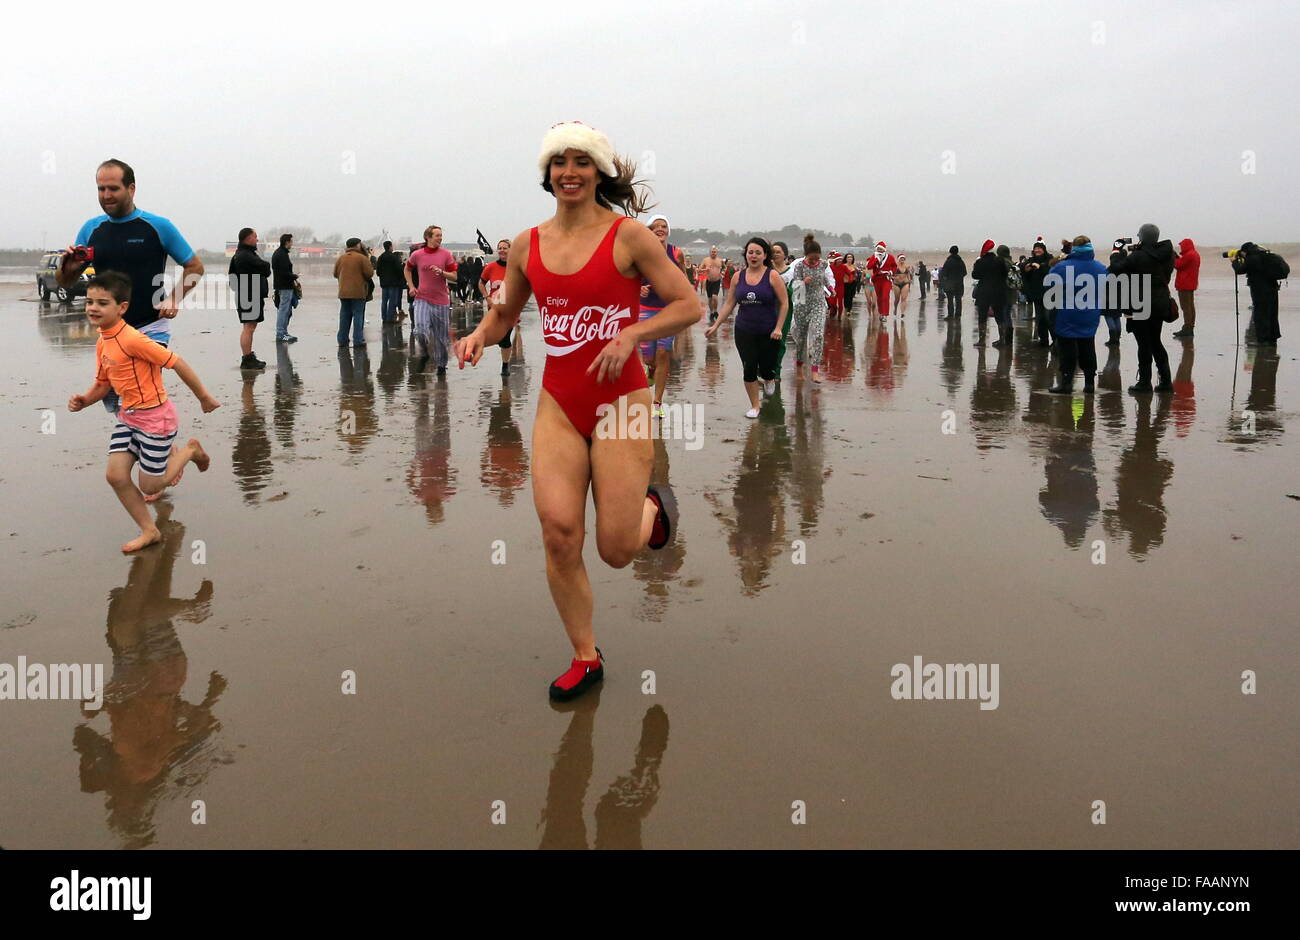 Porthcawl, UK. Friday 25 December 2015 A woman in a Coca Cola bathing costume and a Santa hat joins othert Christmas swimmers running towards the seaRe: Hundreds of people in fancy dress, have taken part in this year's Christmas Swim in Porthcawl, south Wales. Credit:  D Legakis/Alamy Live News Stock Photo